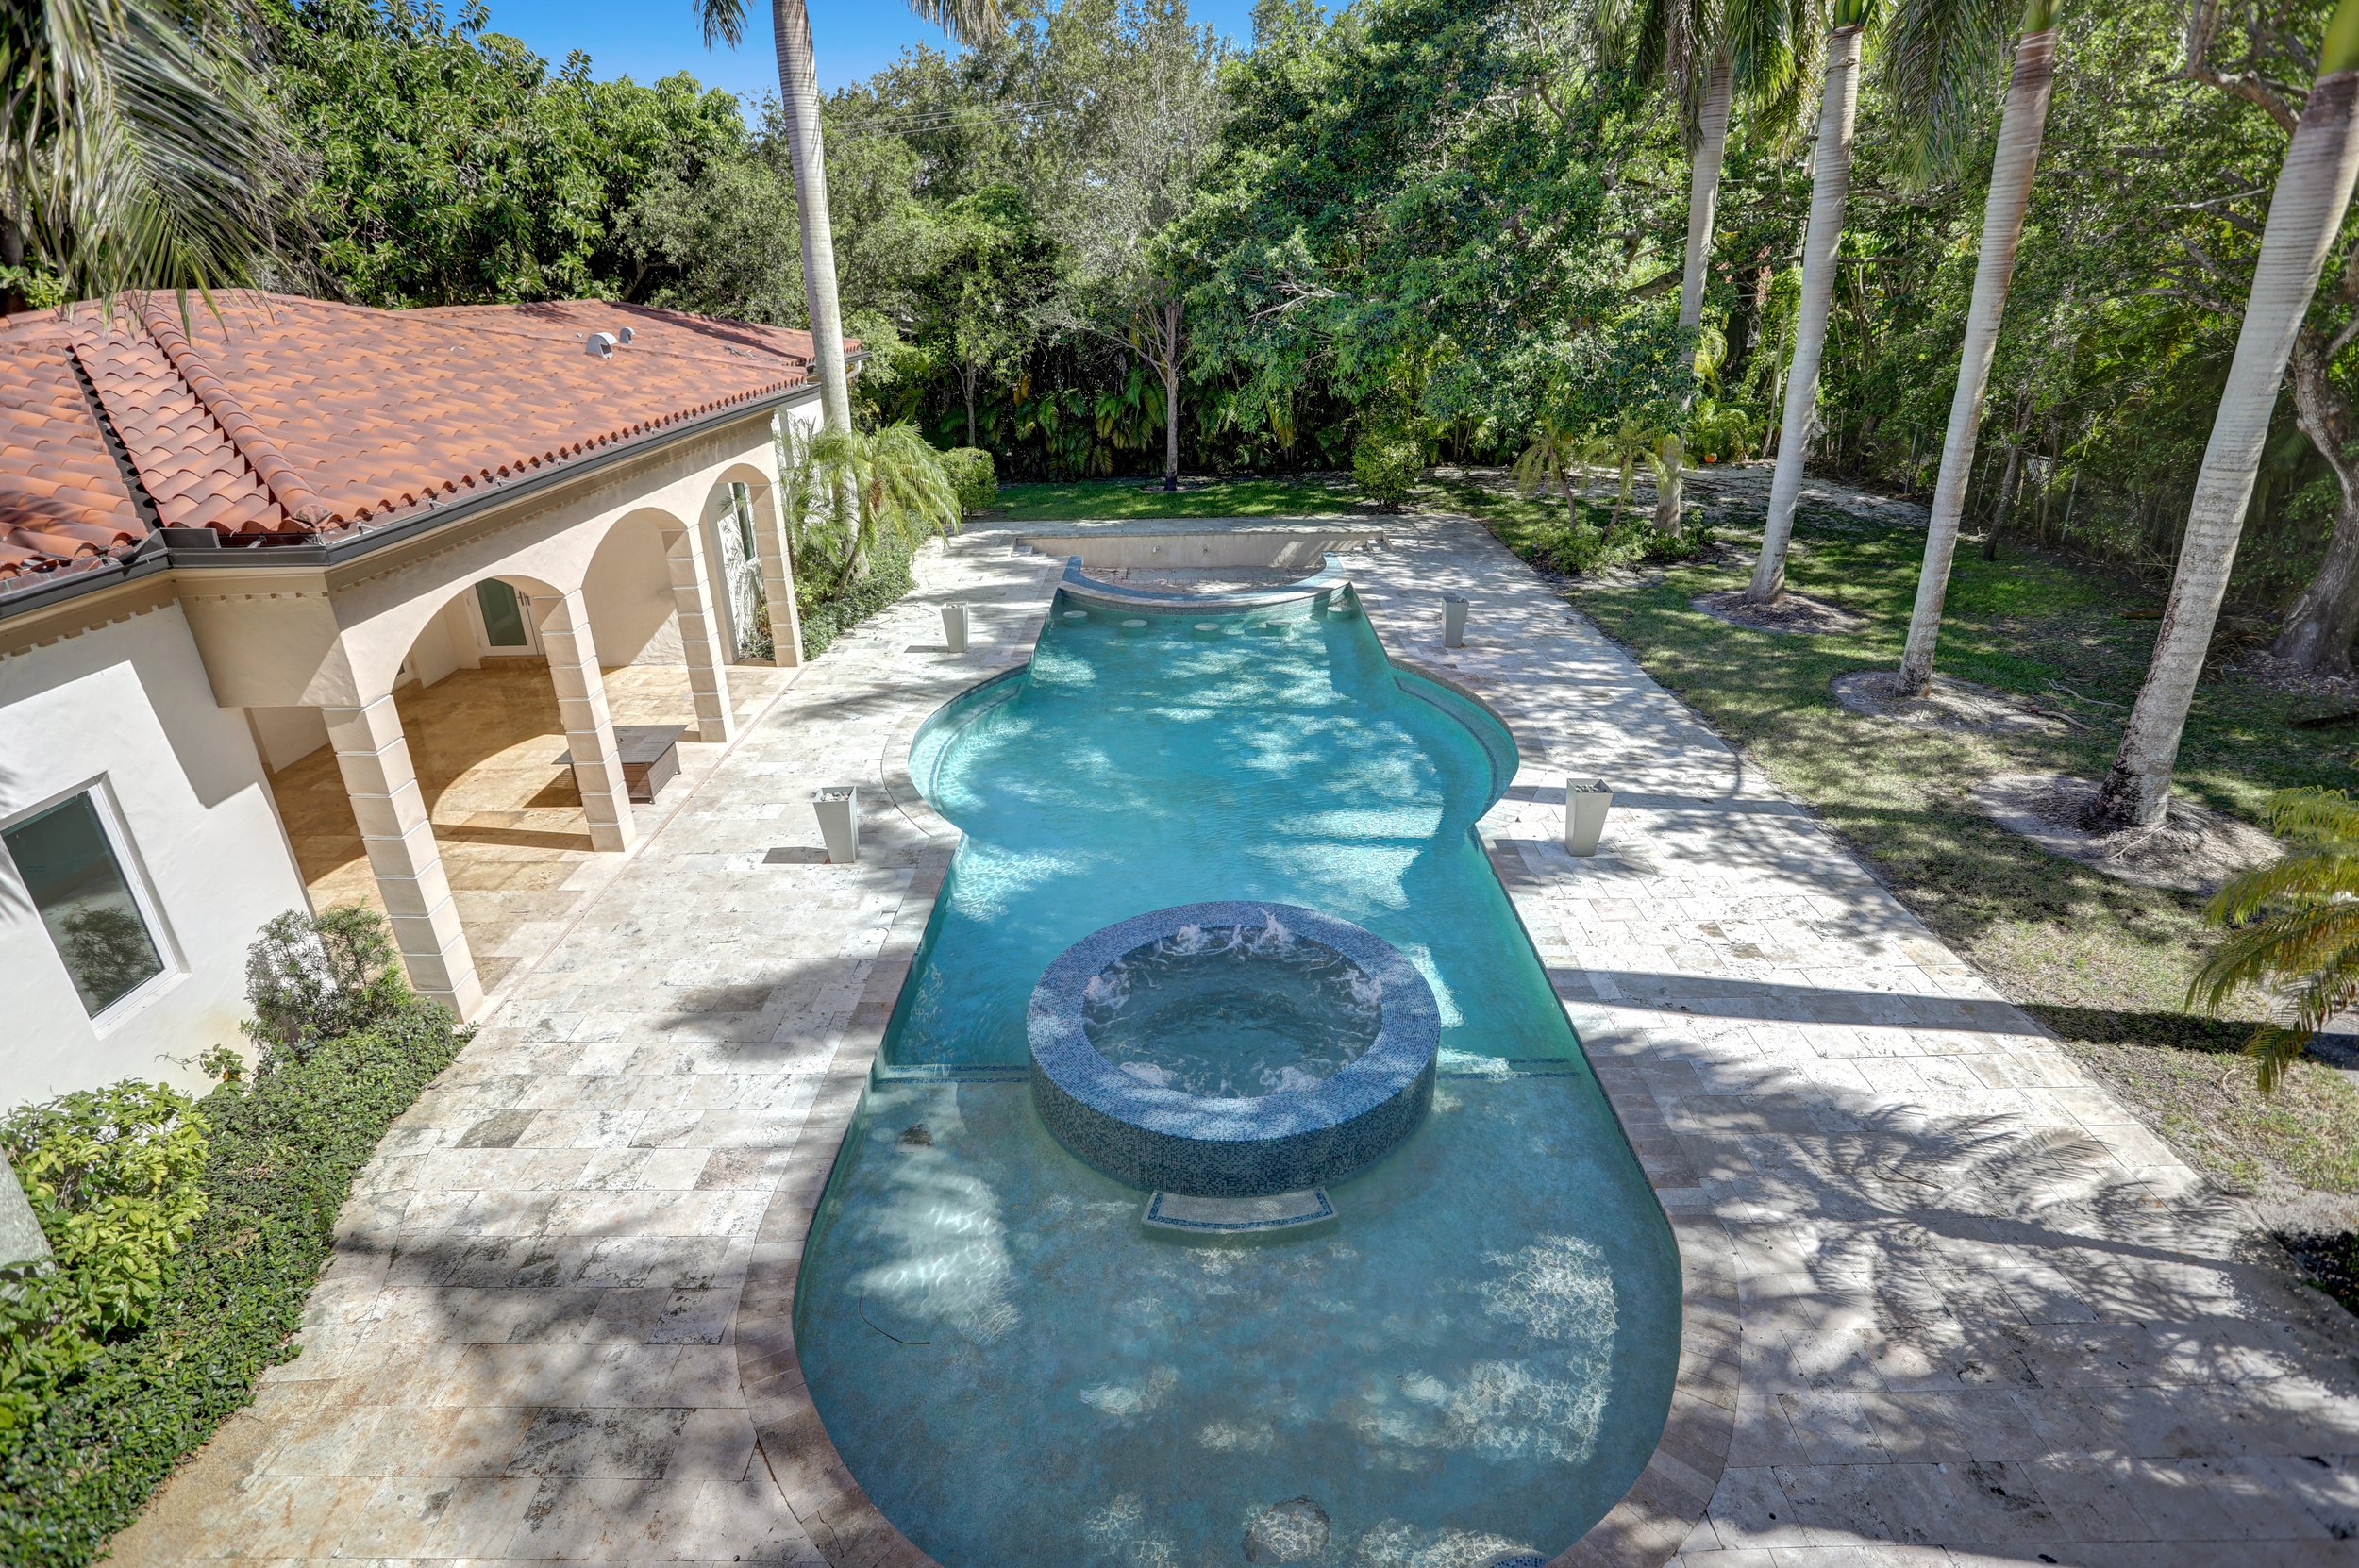 Master Brokers Forum Listing: Check Out A Pinecrest Mediterranean Mansion Asking $5.9 Million8.jpg